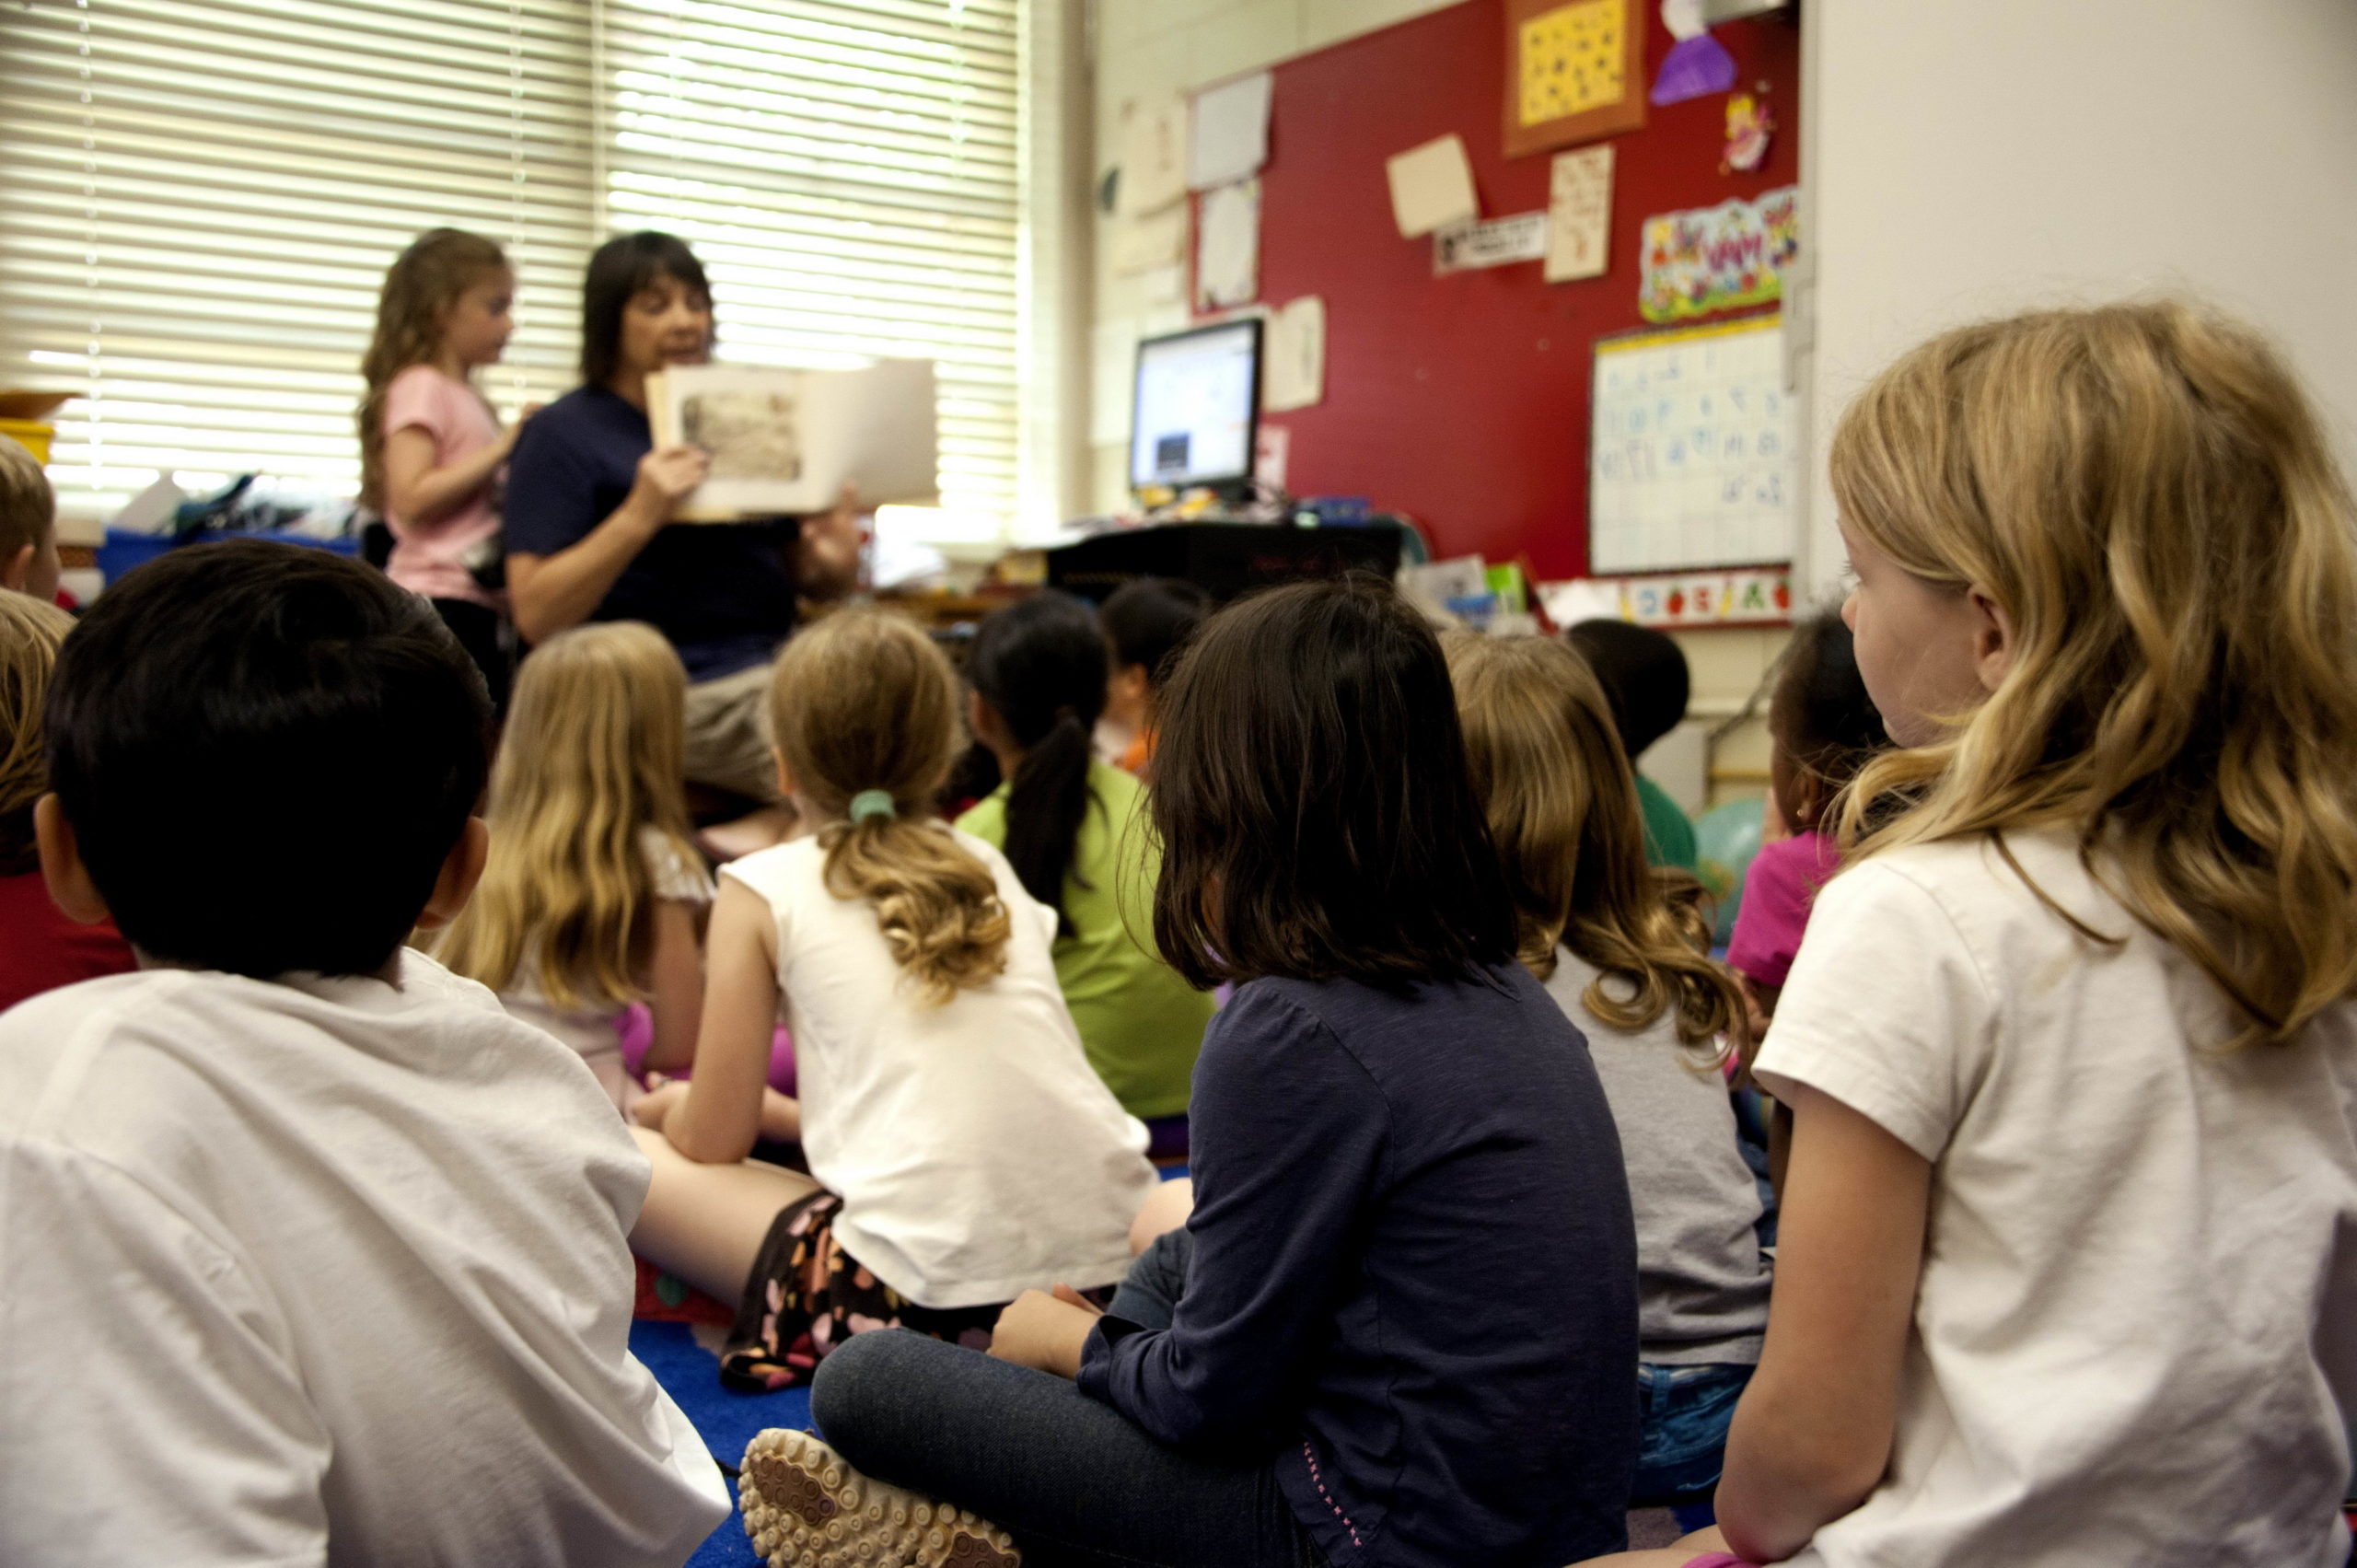 typical-classroom-scene-where-an-audience-of-school-children-were-seated-on-the-floor